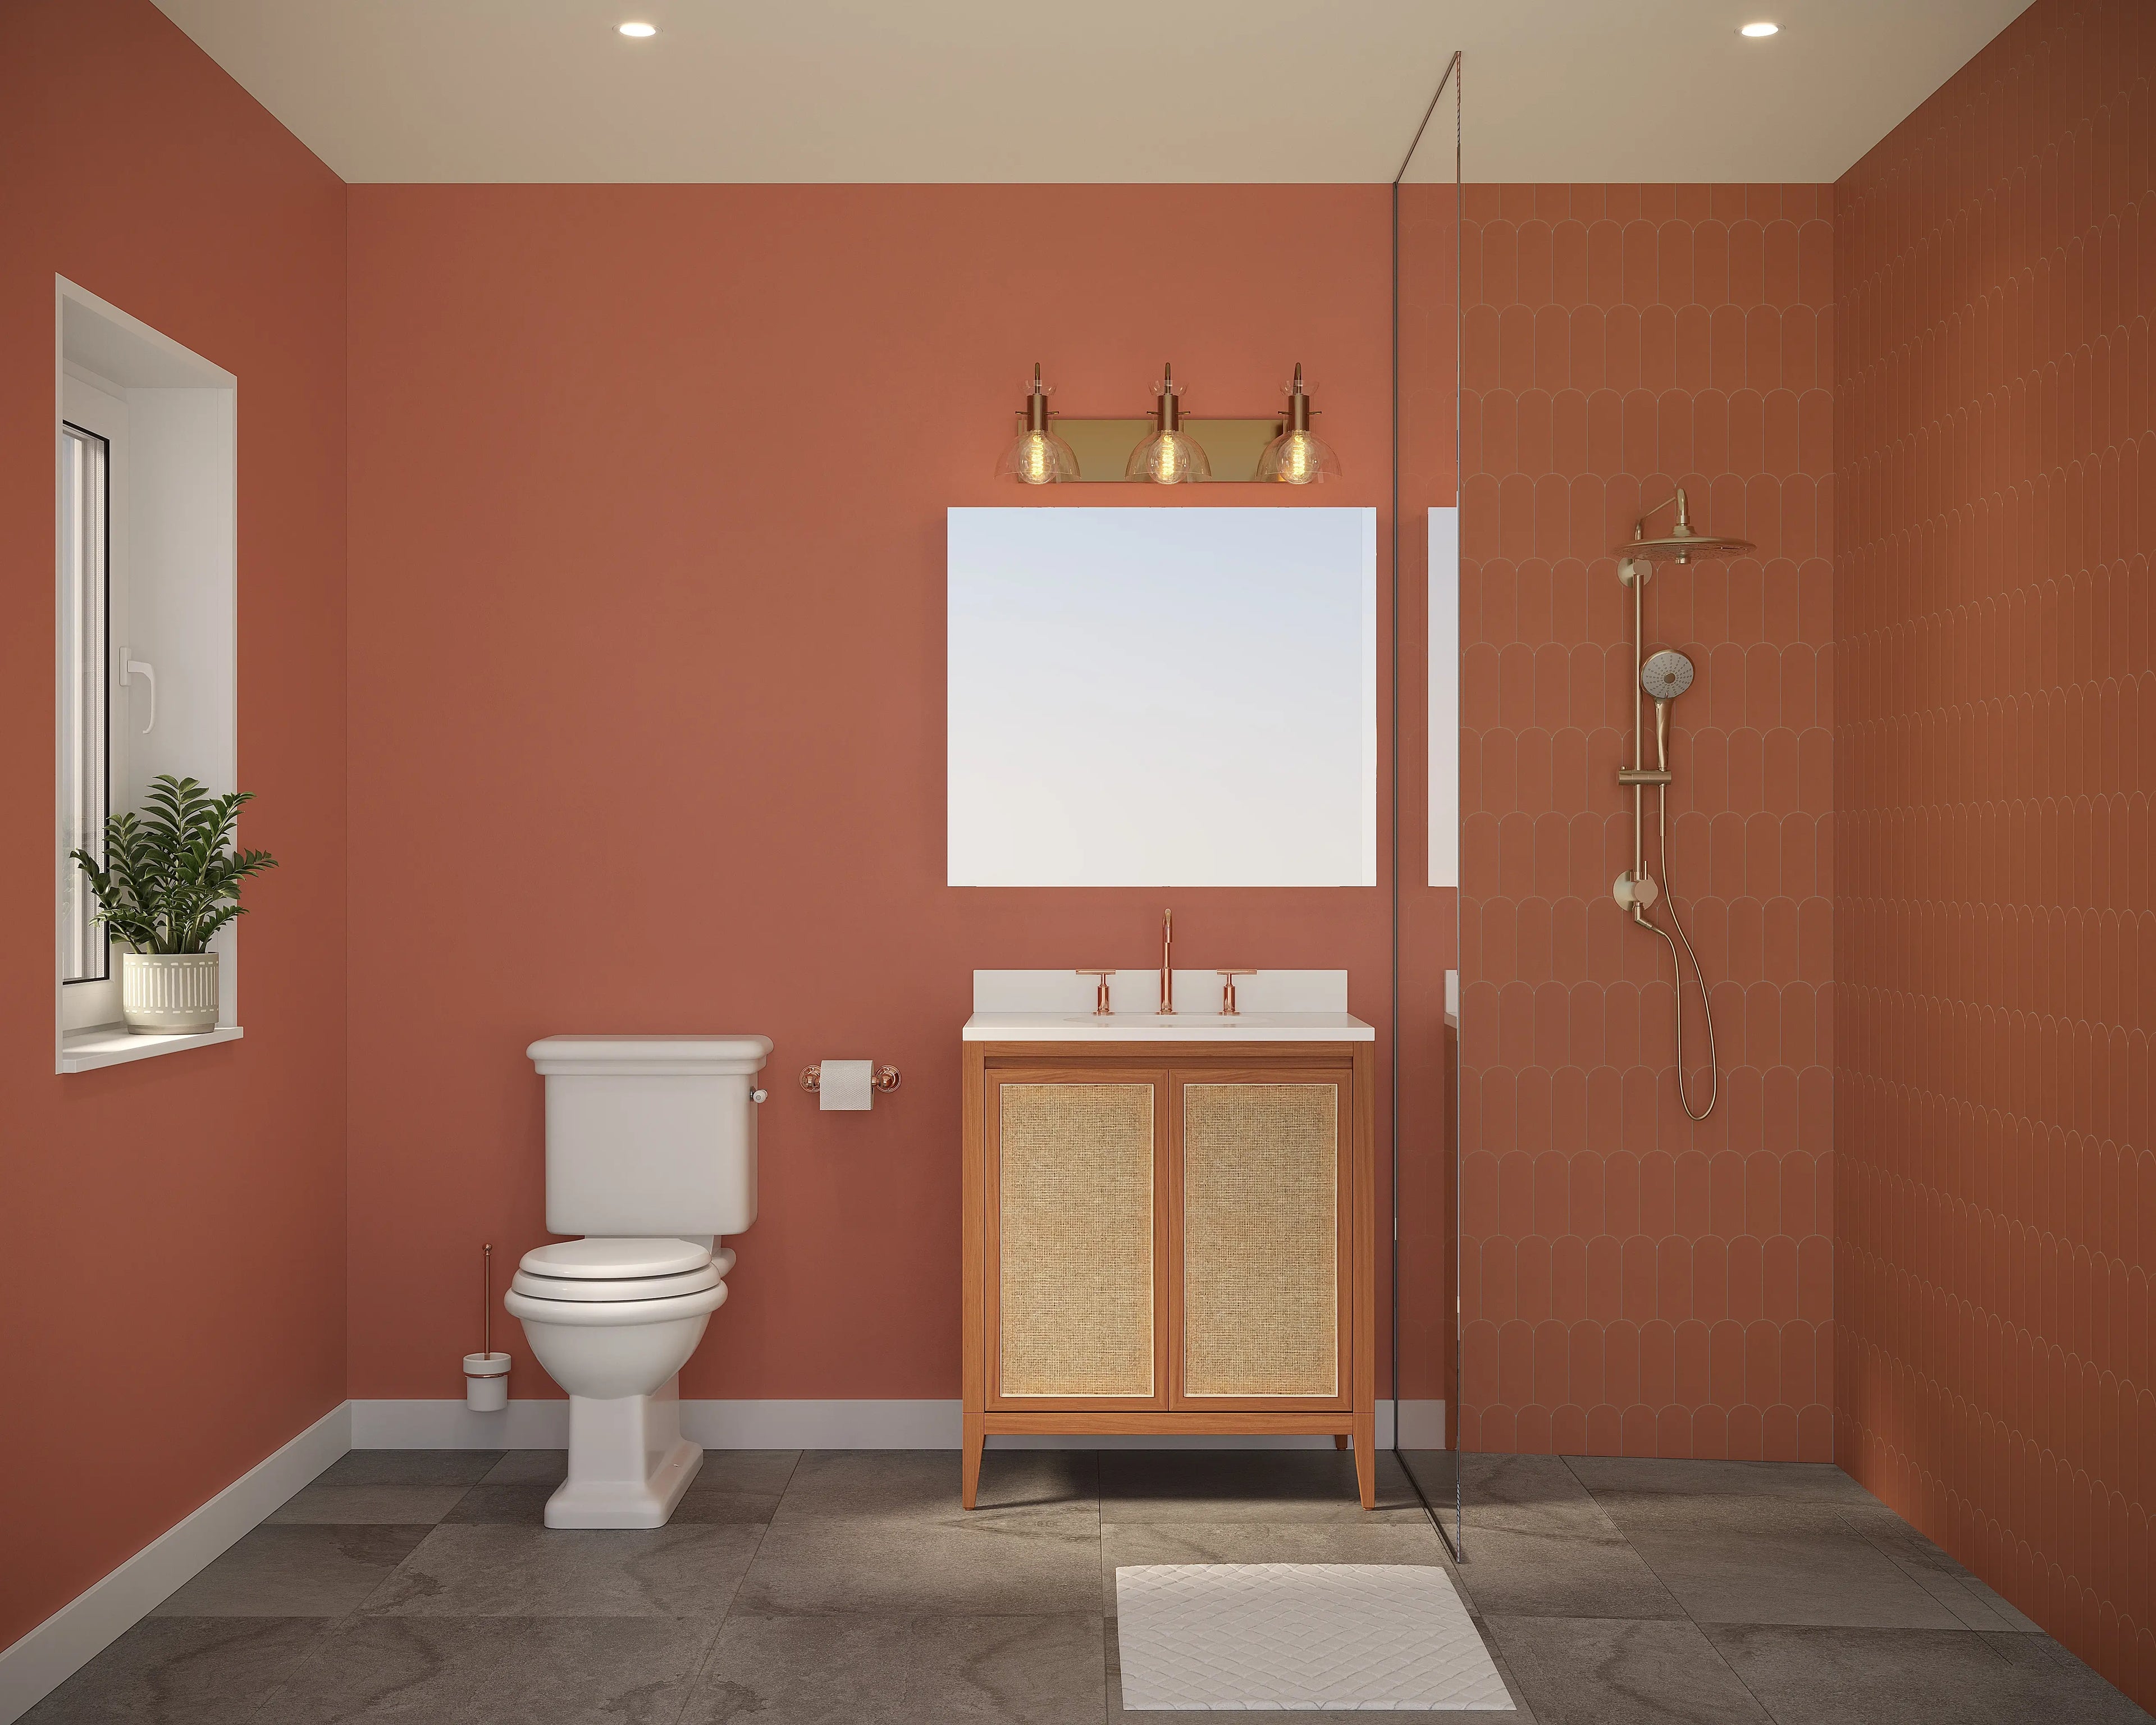 See photos of The Wanda Full Bath paint and trim colors in different spaces, including bathrooms, bedrooms, living rooms, and ktichens. This design is Stylish, Retro, Fun, and Bright. These reference photos give you an idea of what the wall paint and trim color combinations can look like in your space.